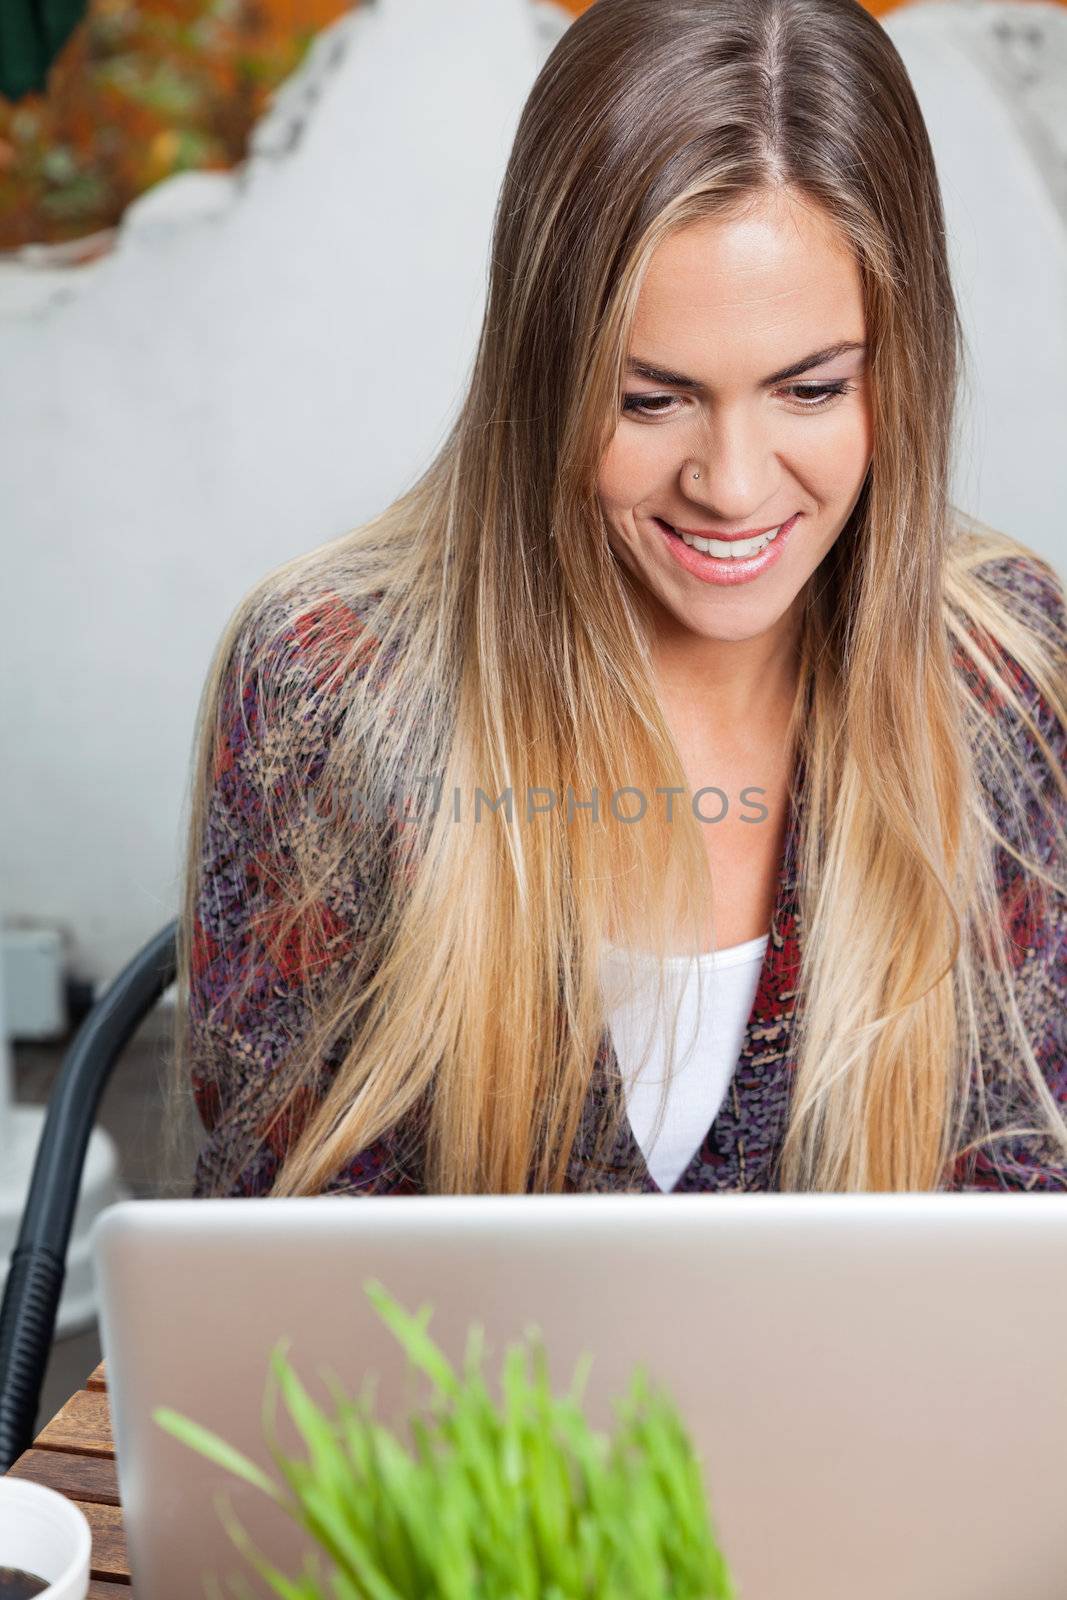 Woman Using Laptop in Cafe by leaf